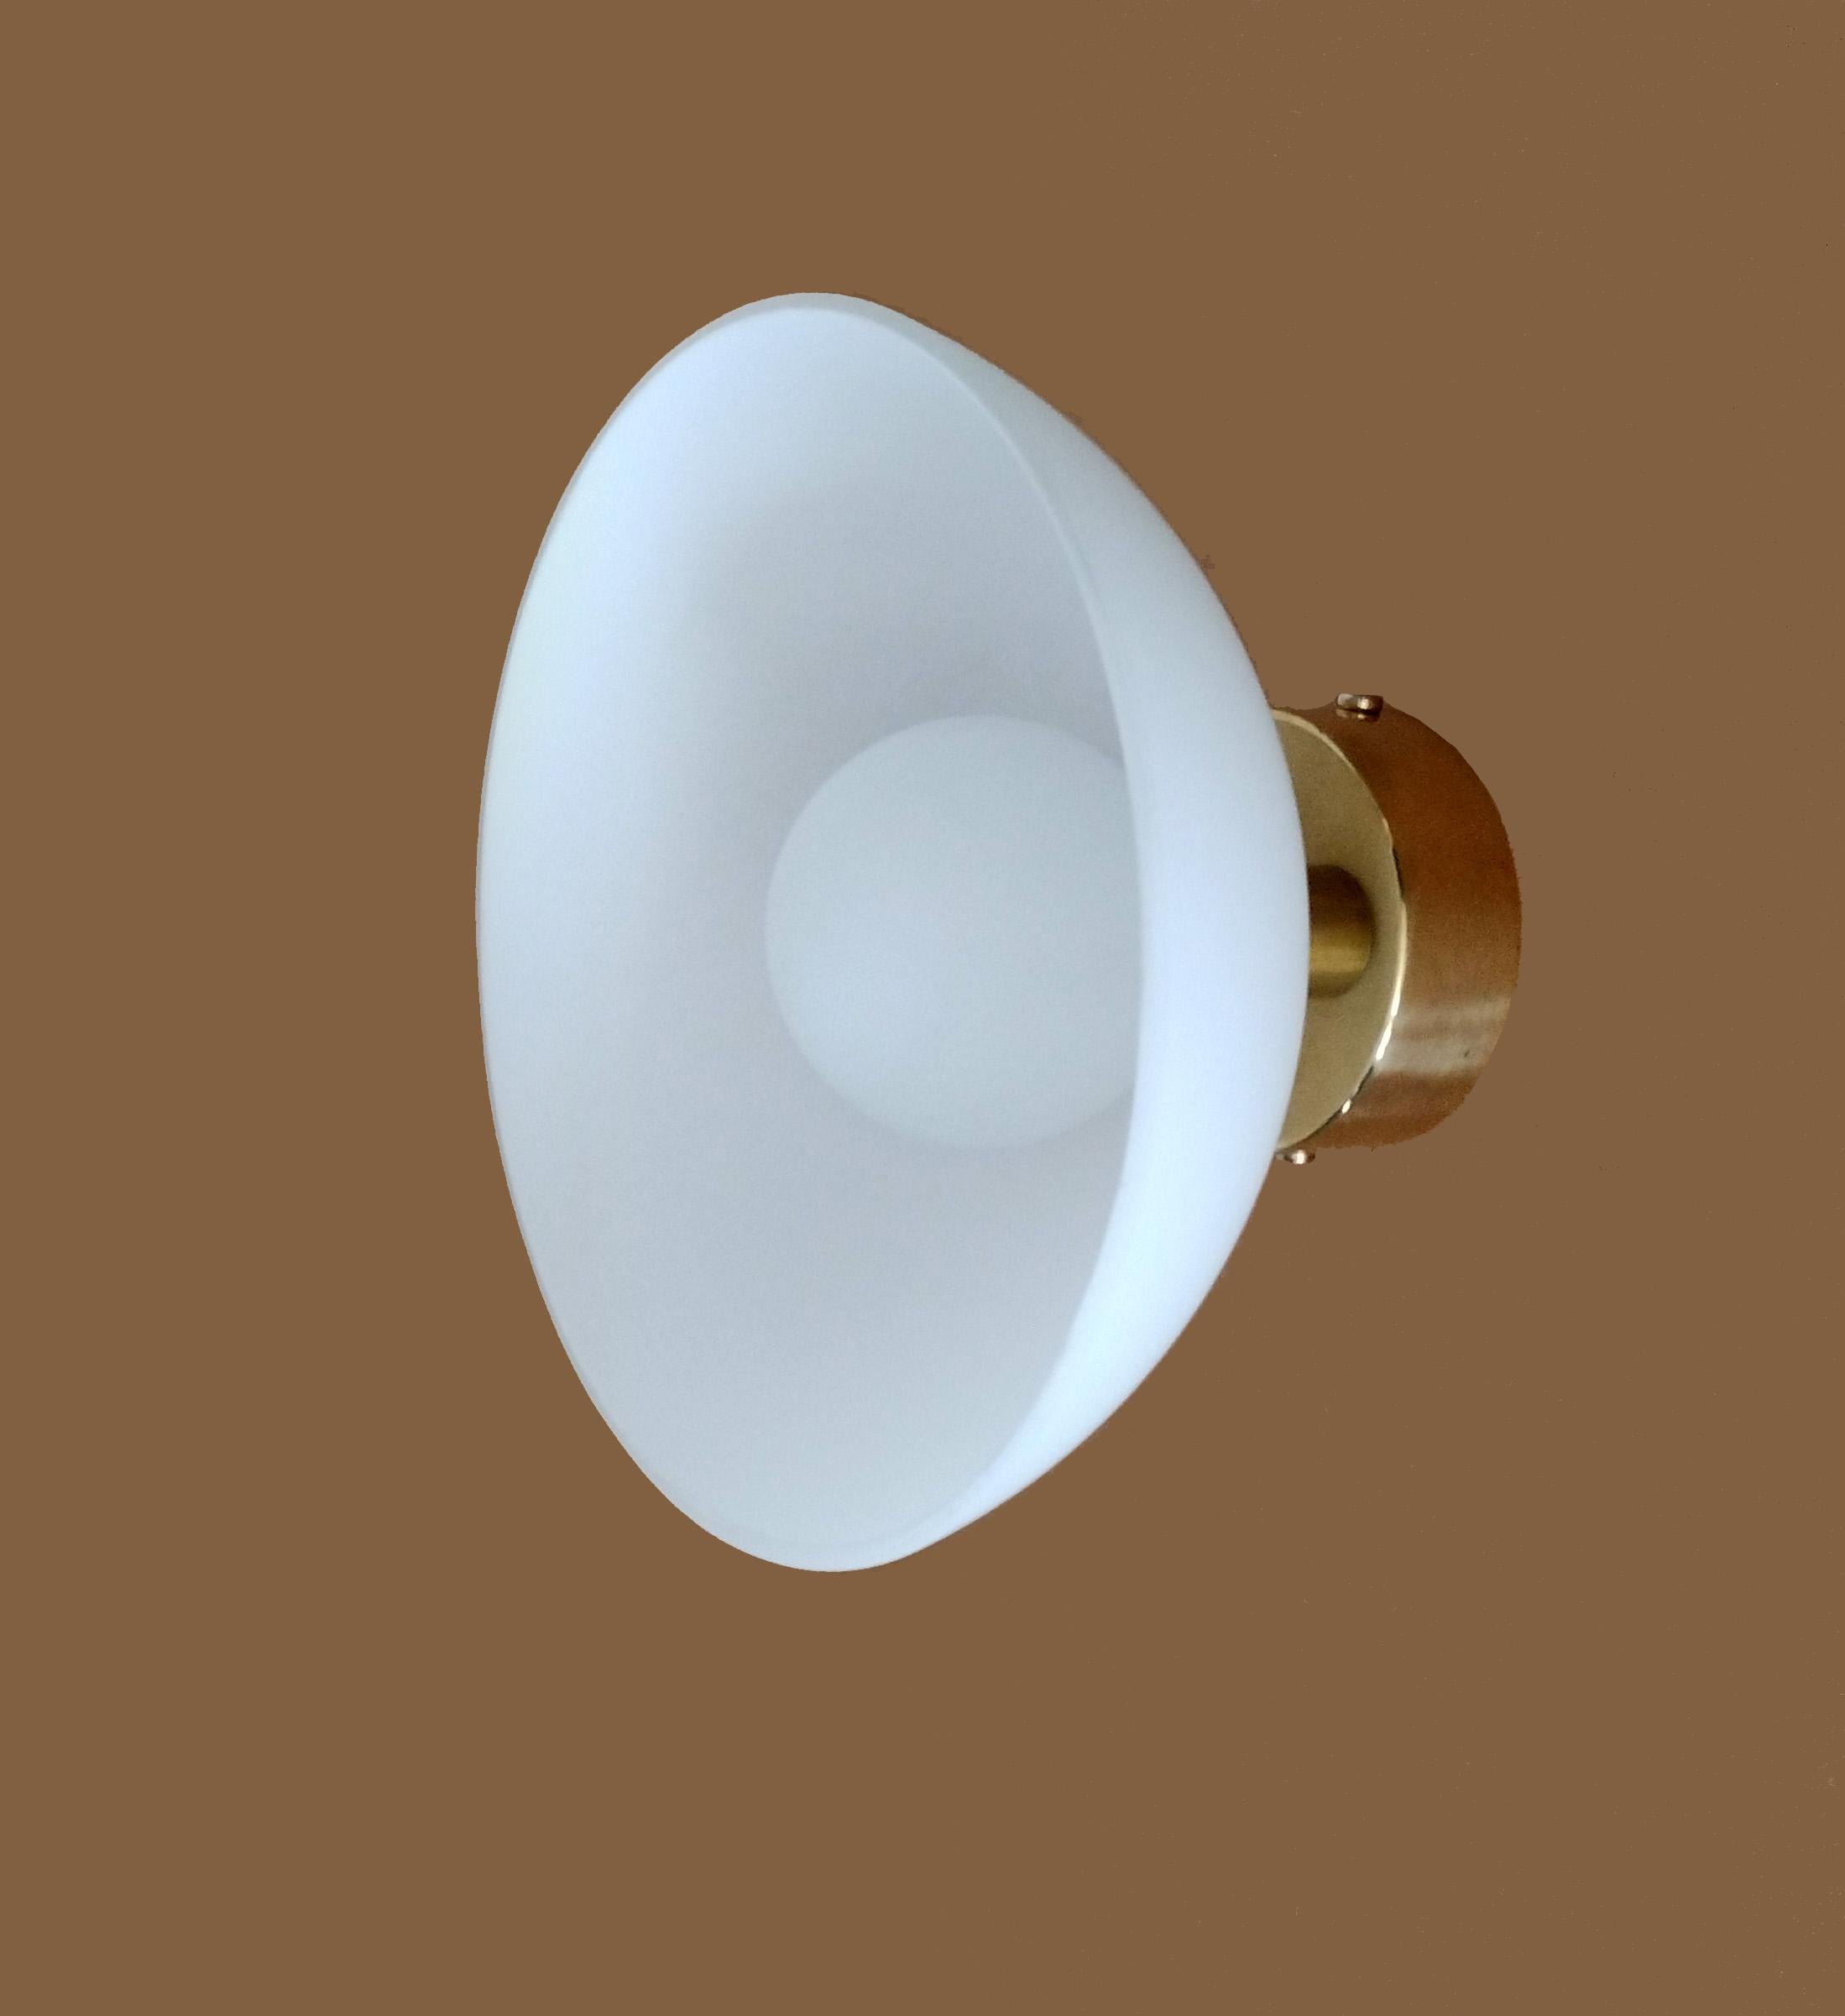 AMIZ is made of brass and opal matte shade. Light emits from the central opal matte sphere.
Shade is non adjustable.

Finished and assembled by hand.

Measures: D 19 cm / W 12 cm. 

Lamping: integrated LED bulb G9

This piece is hardwired. Plug-in